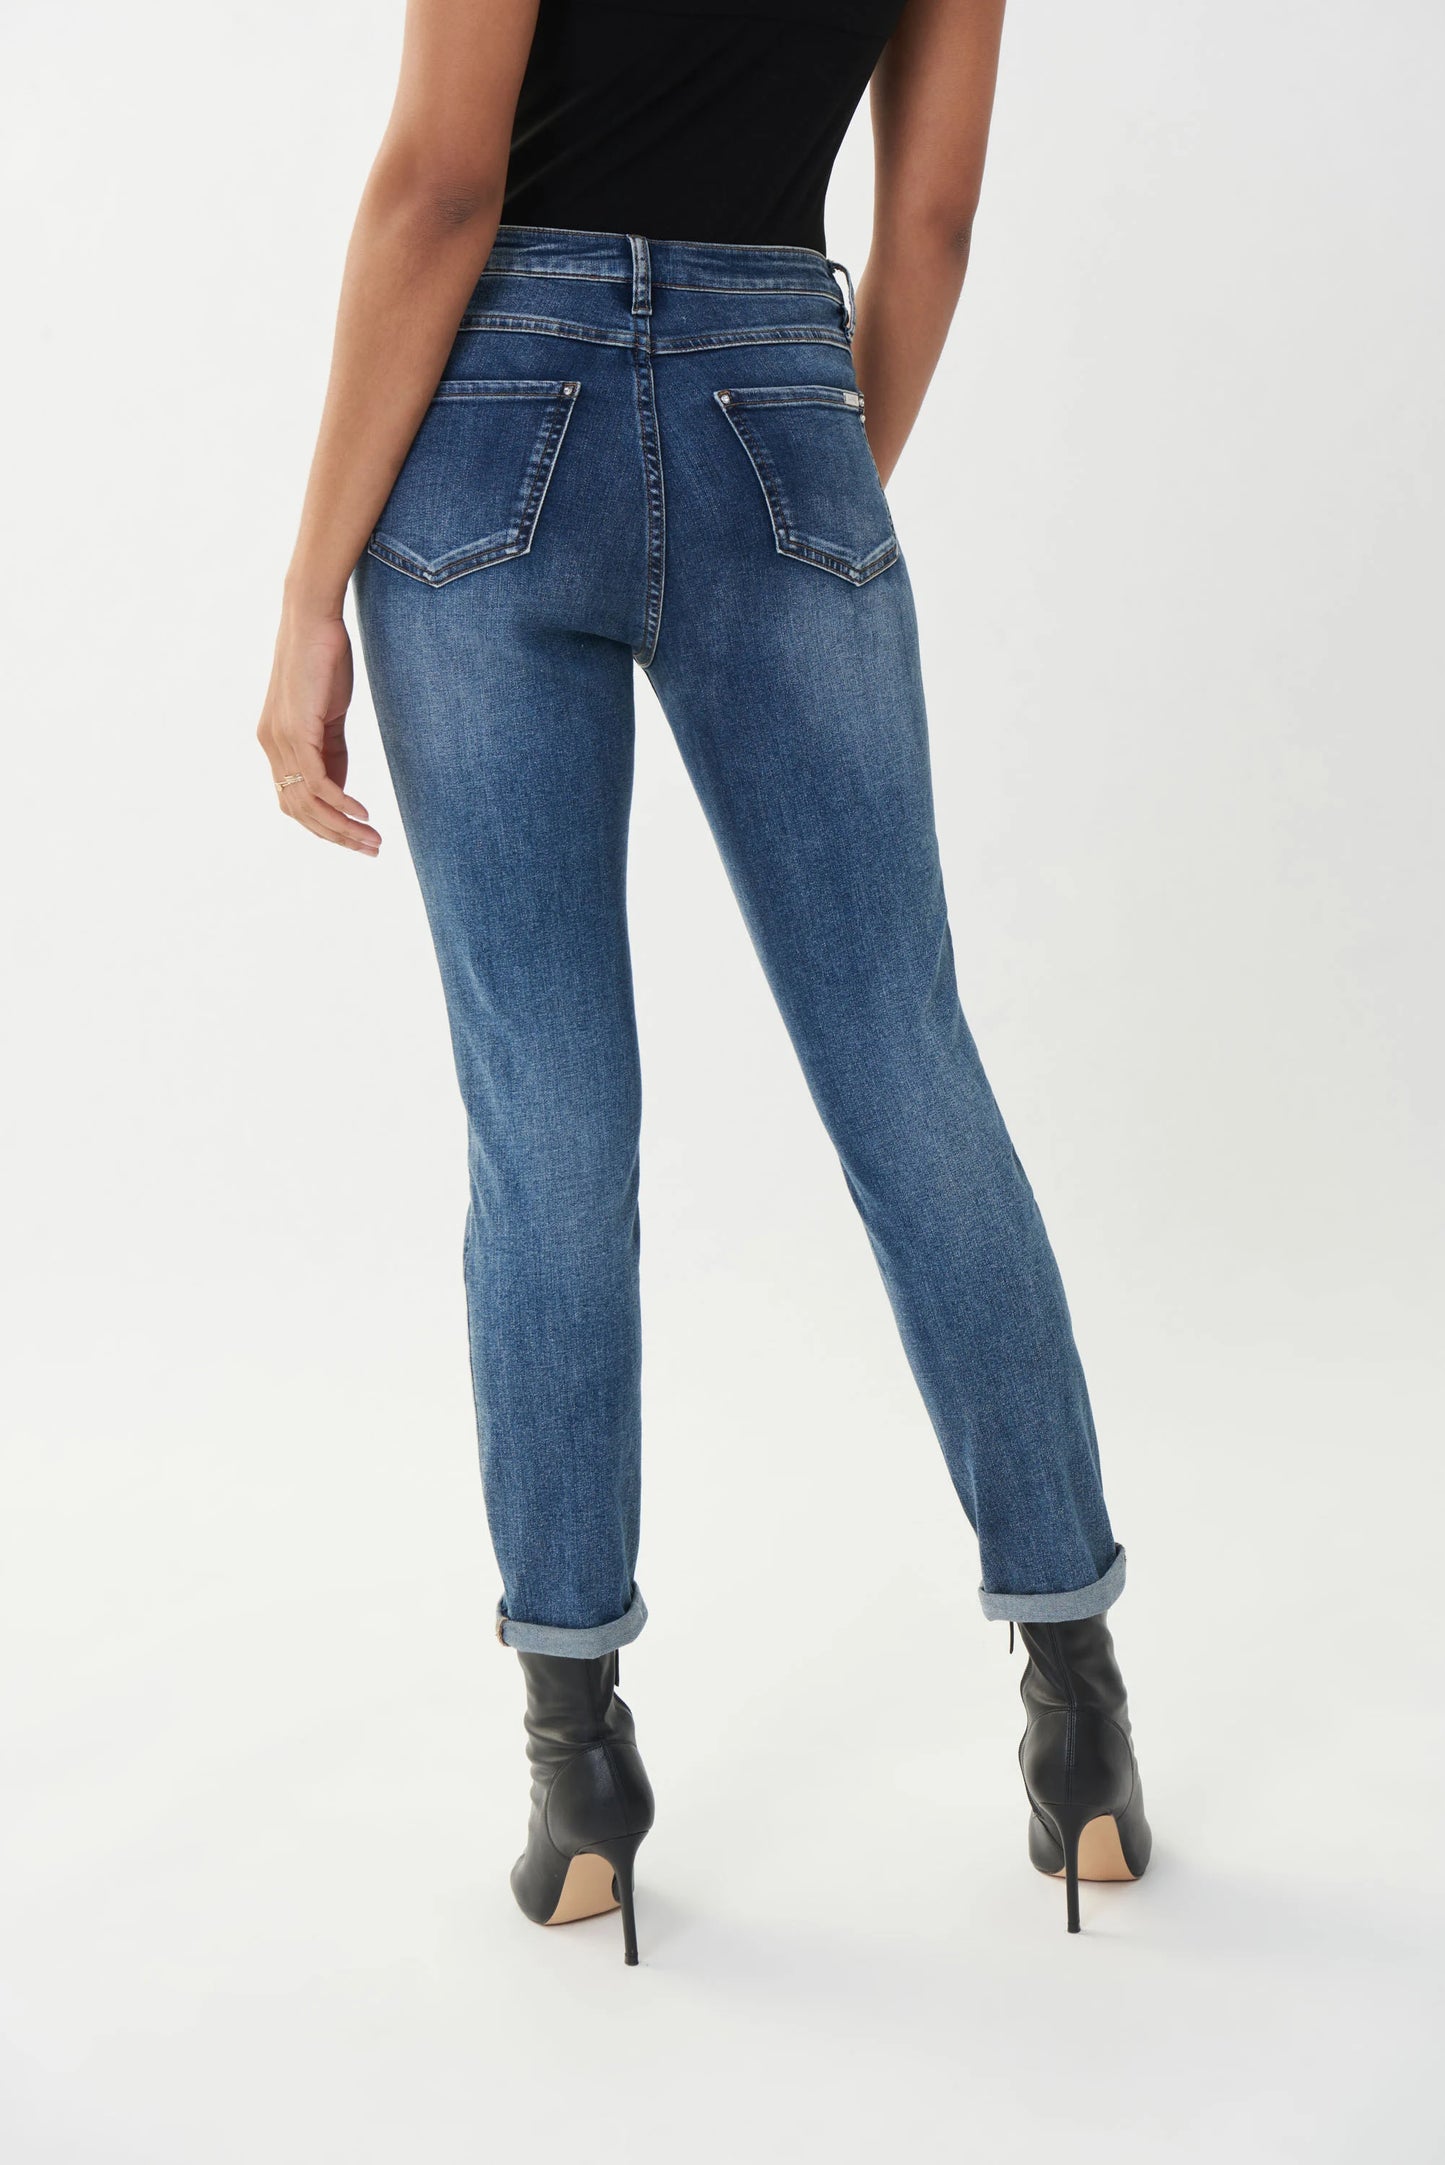 Cropped Jeans With Rolled Hem
213942S24